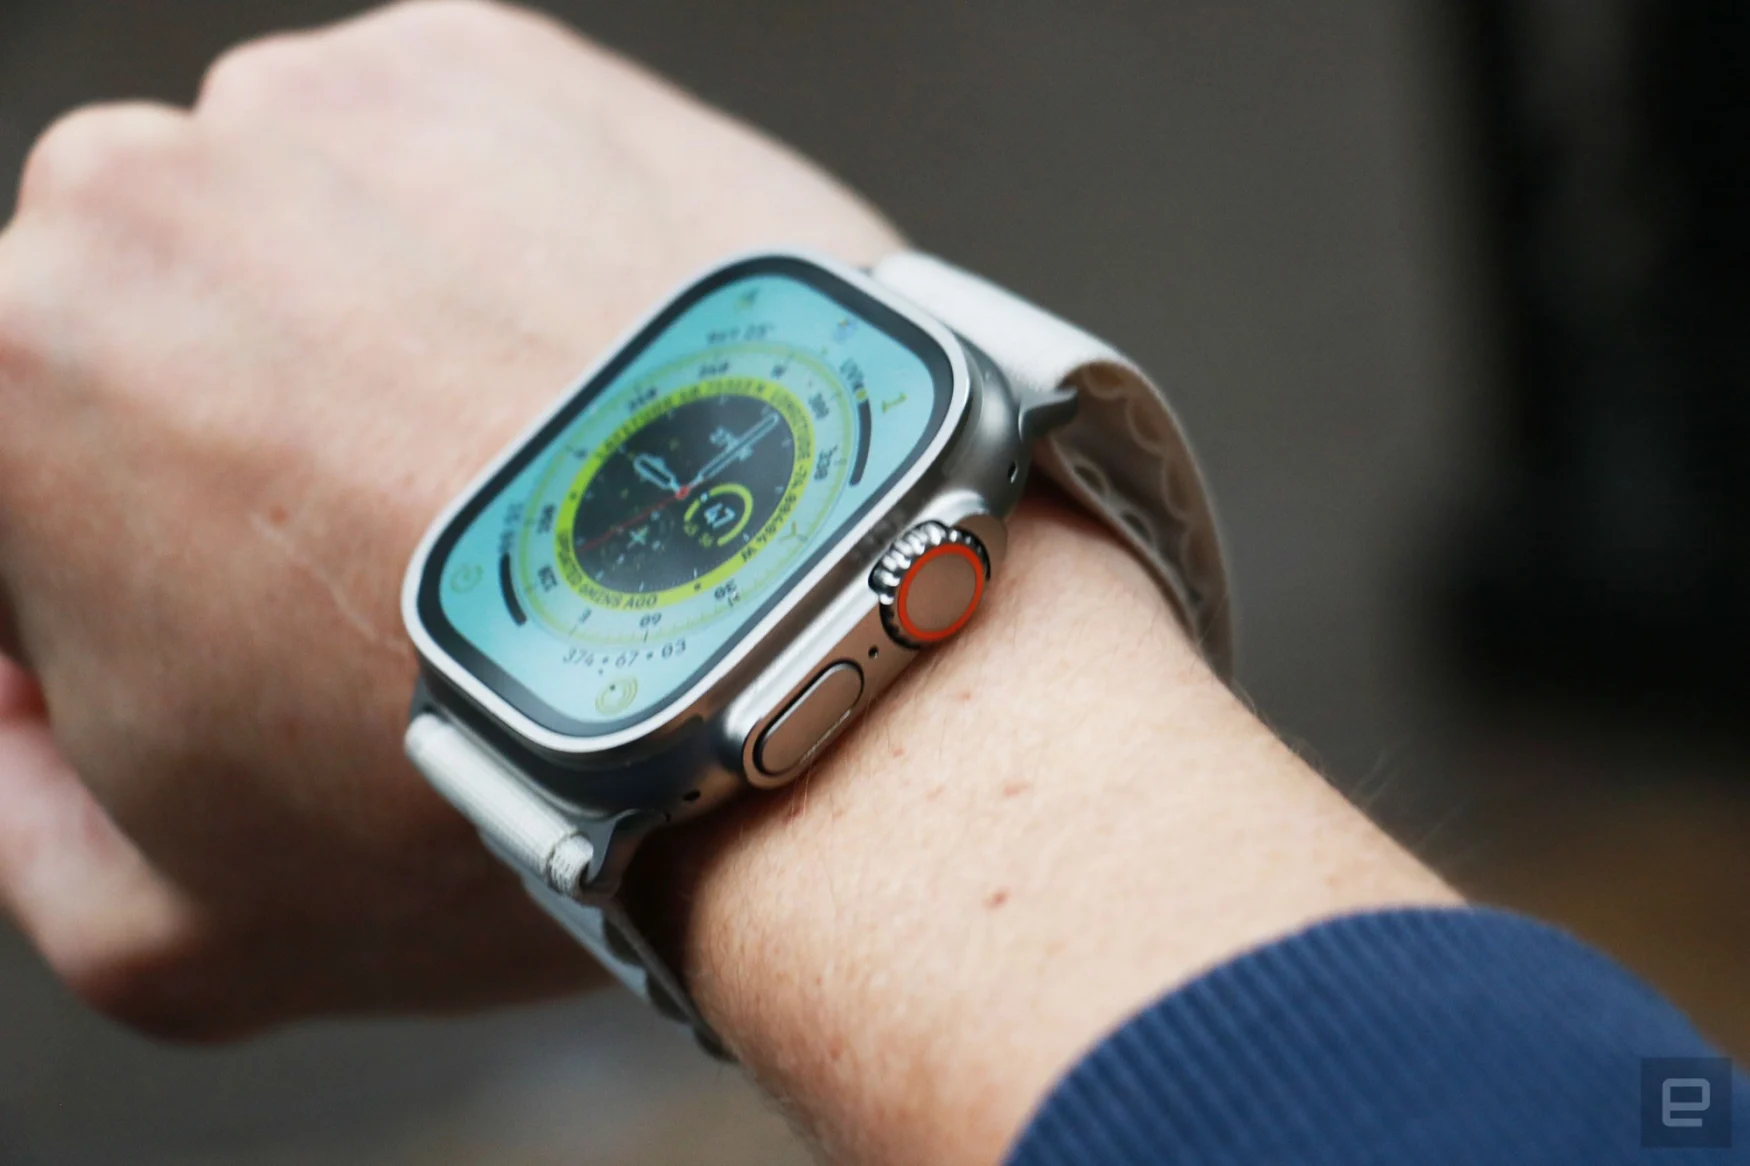 Off-angle view of the Apple Watch Ultra on a person's wrist, with the Wayfinder watch face on its screen.